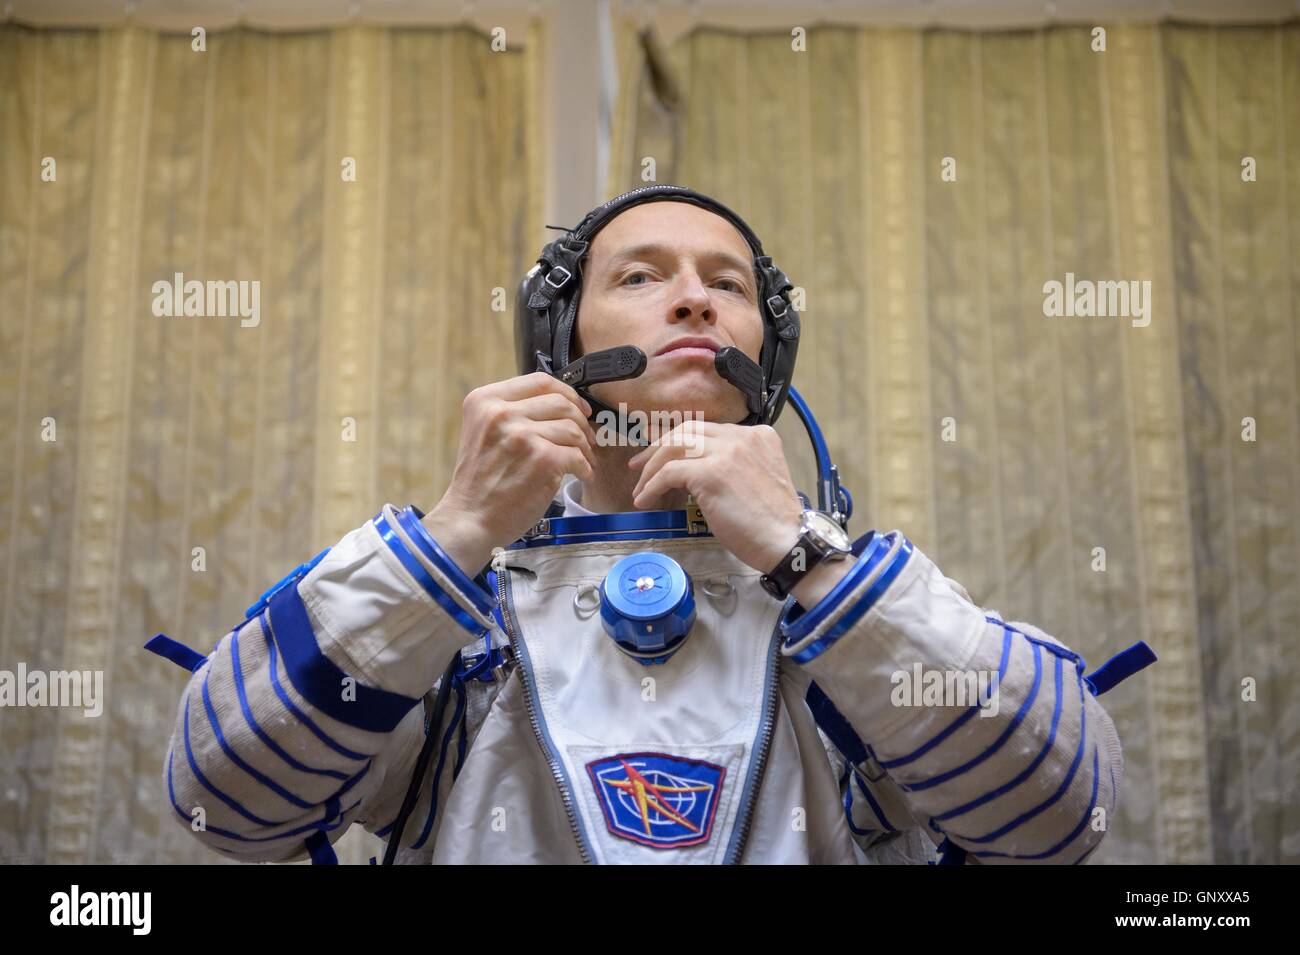 International Space Station Expedition 49-50 prime crew Russian cosmonaut Sergei Ryzhikov dresses in his Sokol spacesuit in preparation for the Soyuz qualification exams at the Gagarin Cosmonaut Training Center August 31, 2016 at Star City, Russia. Stock Photo